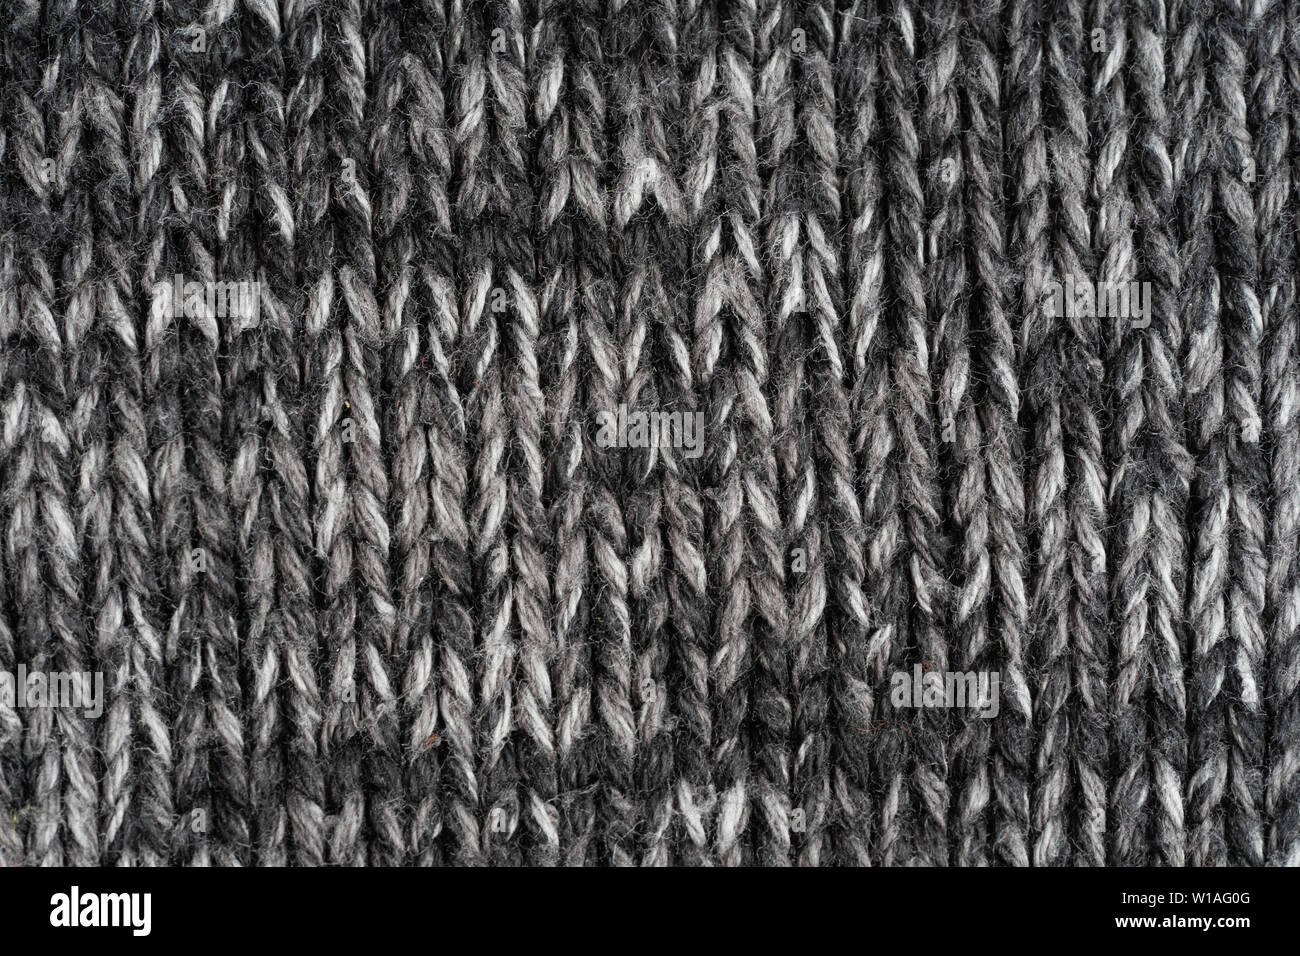 Texture knitted fabric. Warm sweater made of different color yarn. Creative vintage background Stock Photo